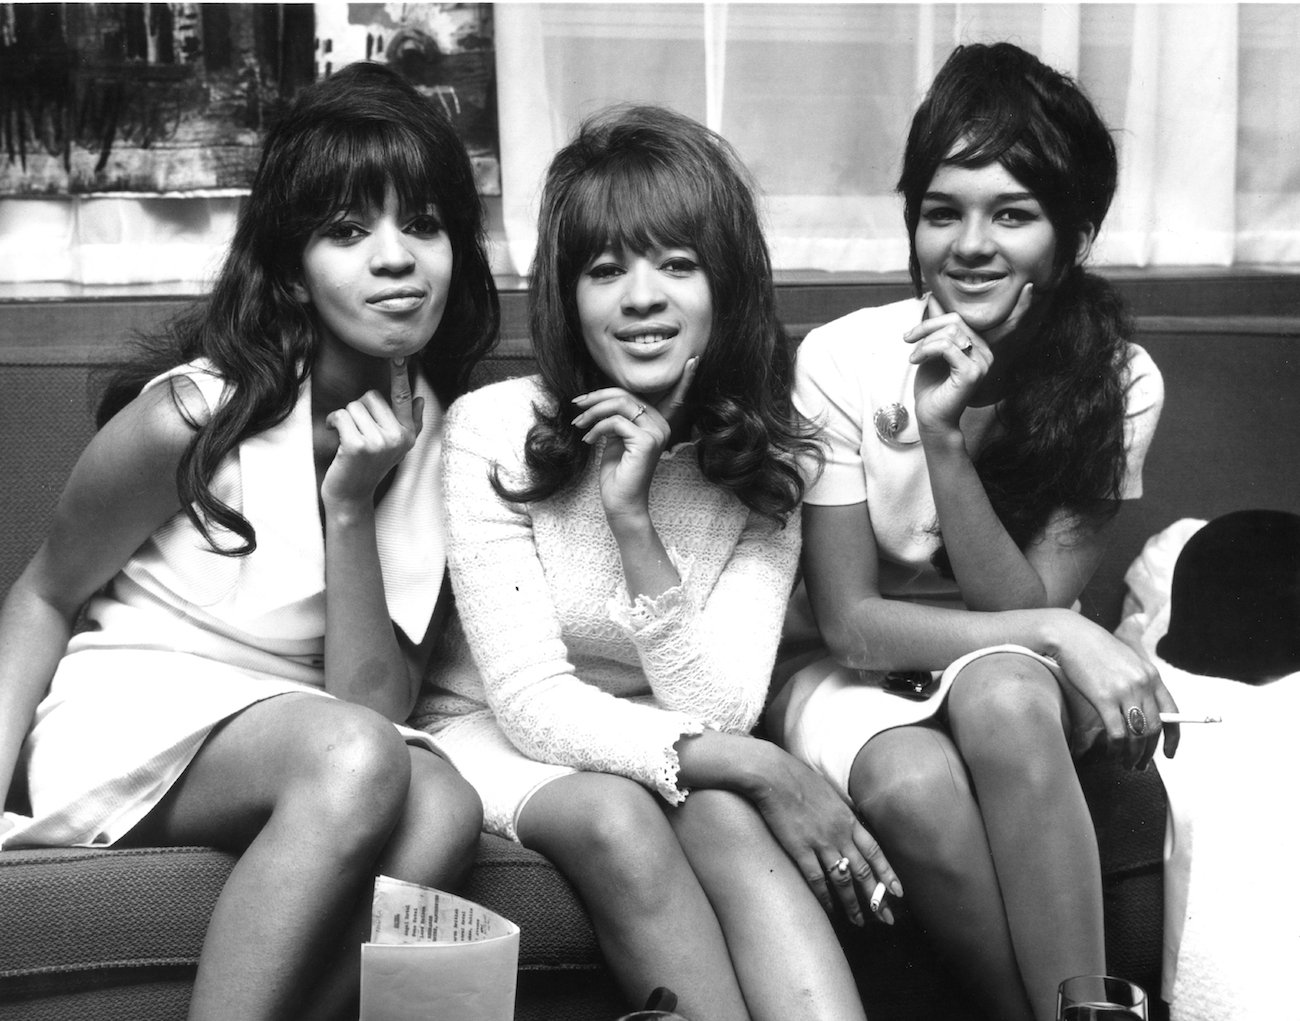 The Ronettes, Estelle Bennett, Ronnie Spector, and Nedra Talley posing for a photo wearing matching white outfits in 1964.